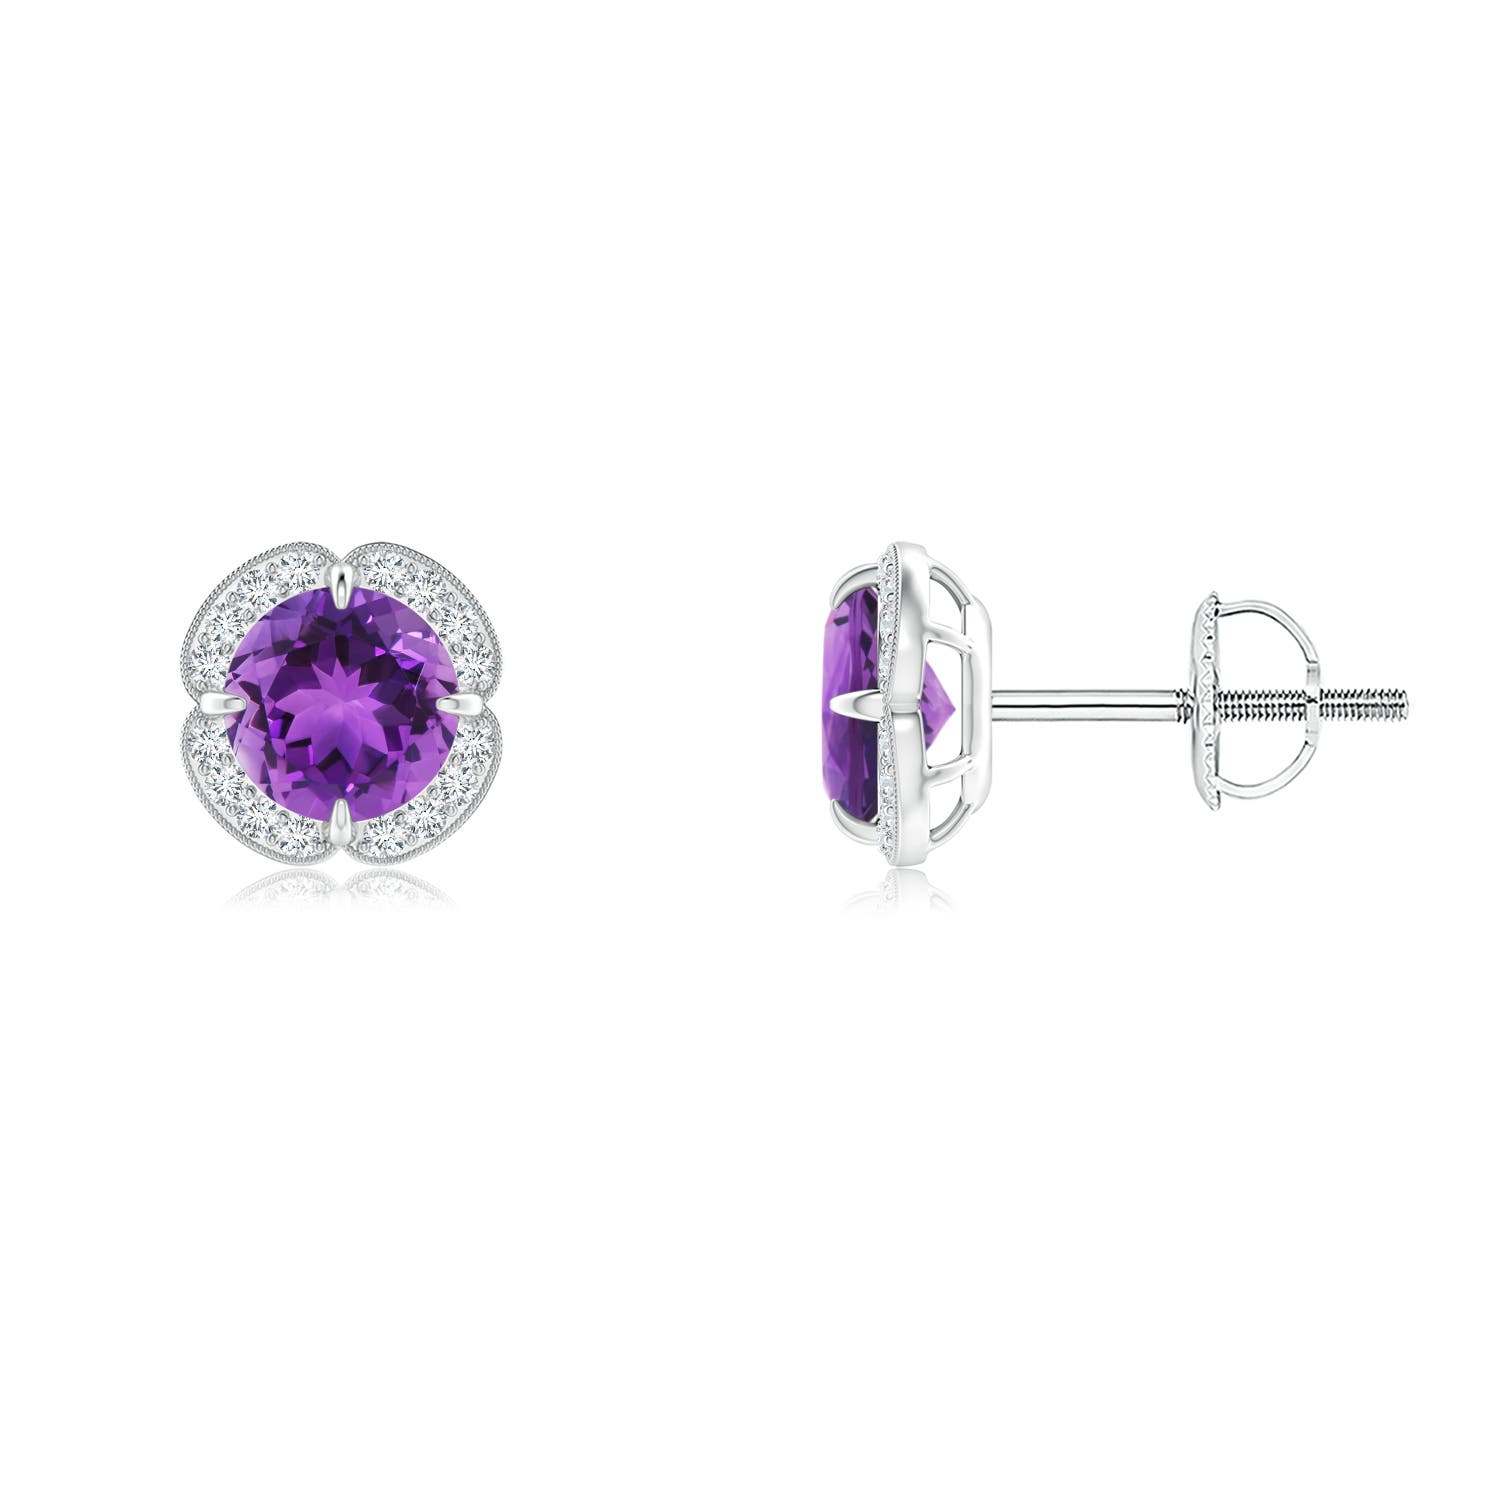 AAA - Amethyst / 1.01 CT / 14 KT White Gold